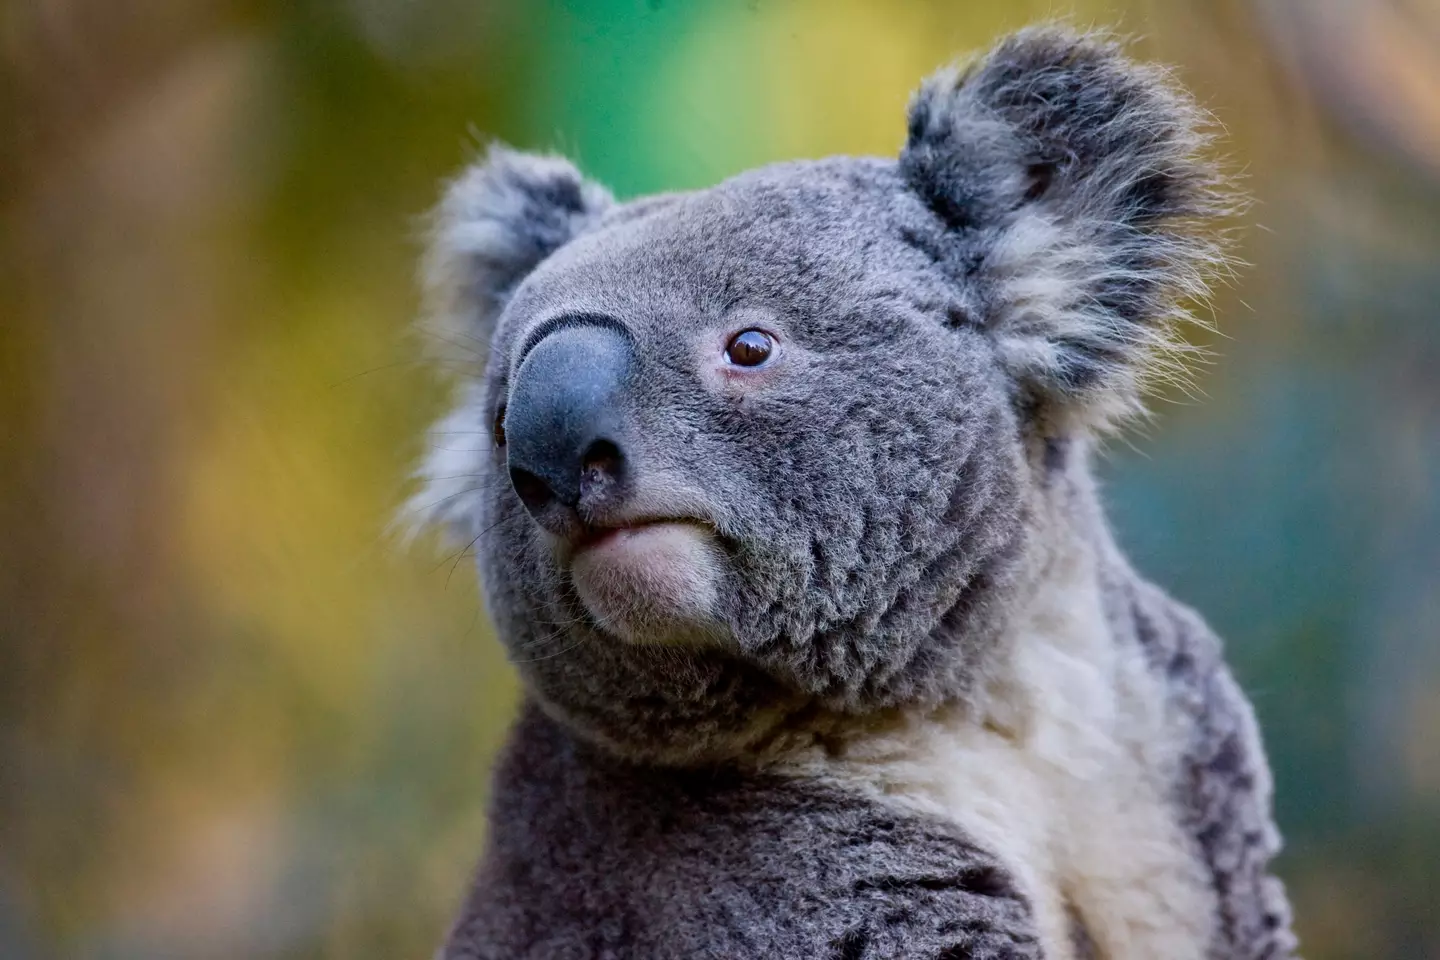 Koala's have been compared to pigs in light of the oink-like noises they make.